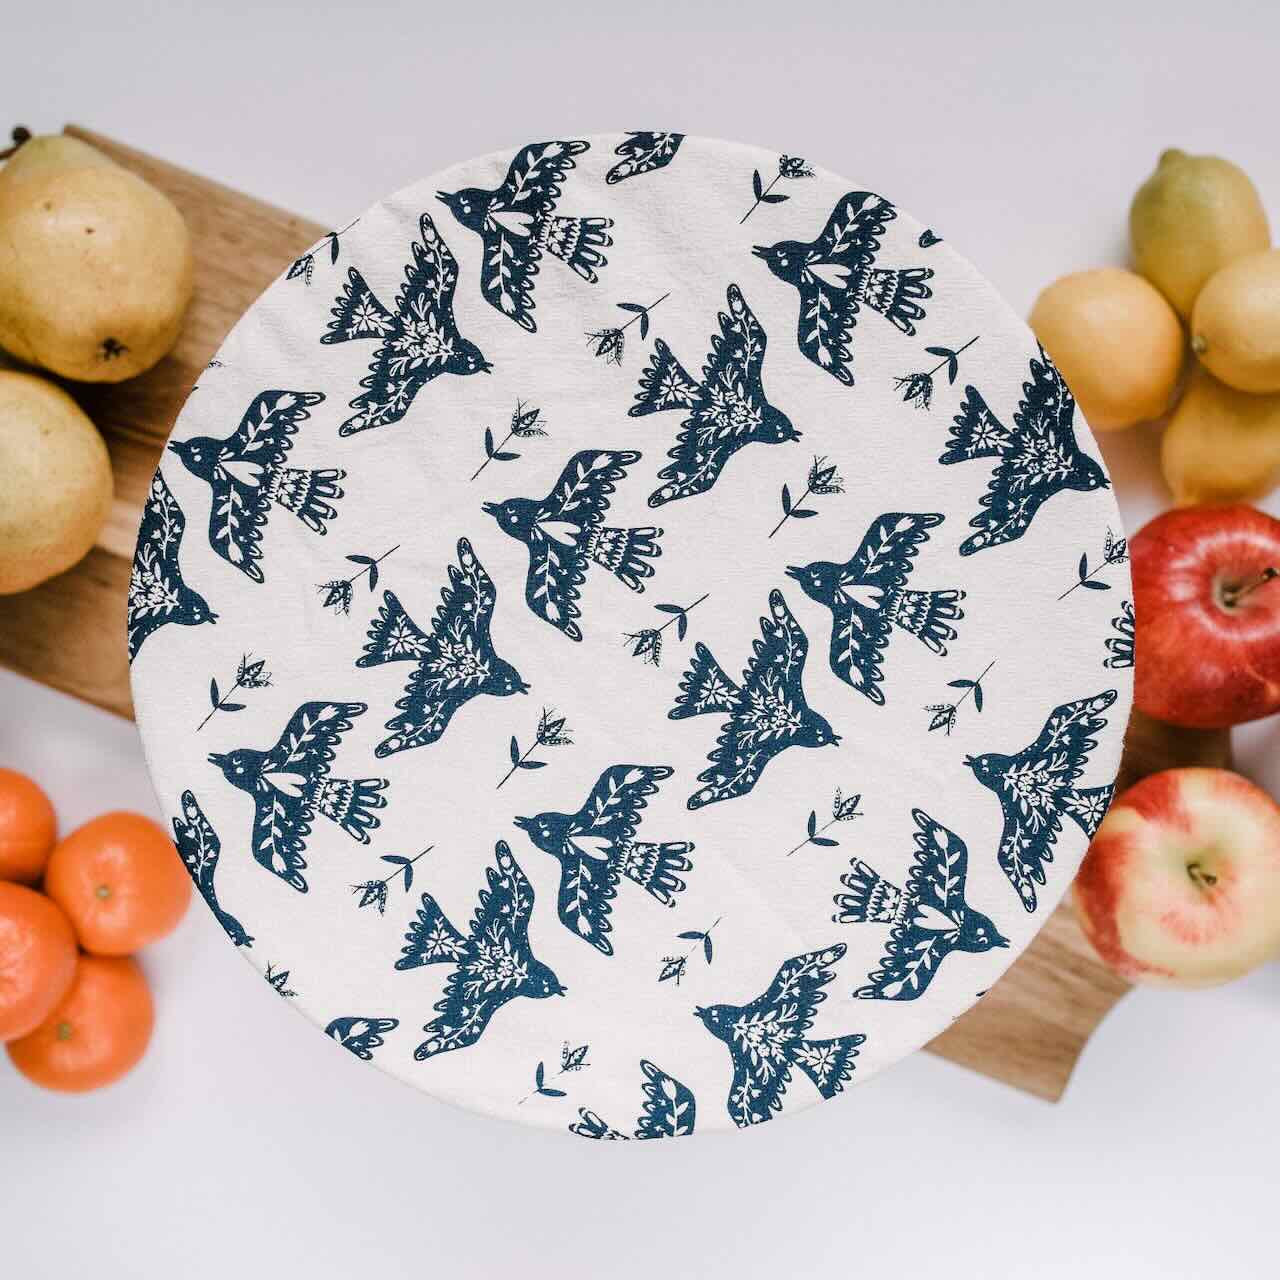 flat lay of a large bowl covered by a navy flying birds patterned cotton bowl cover on a wooden chopping board, surrounded by apple, oranges and lemons.